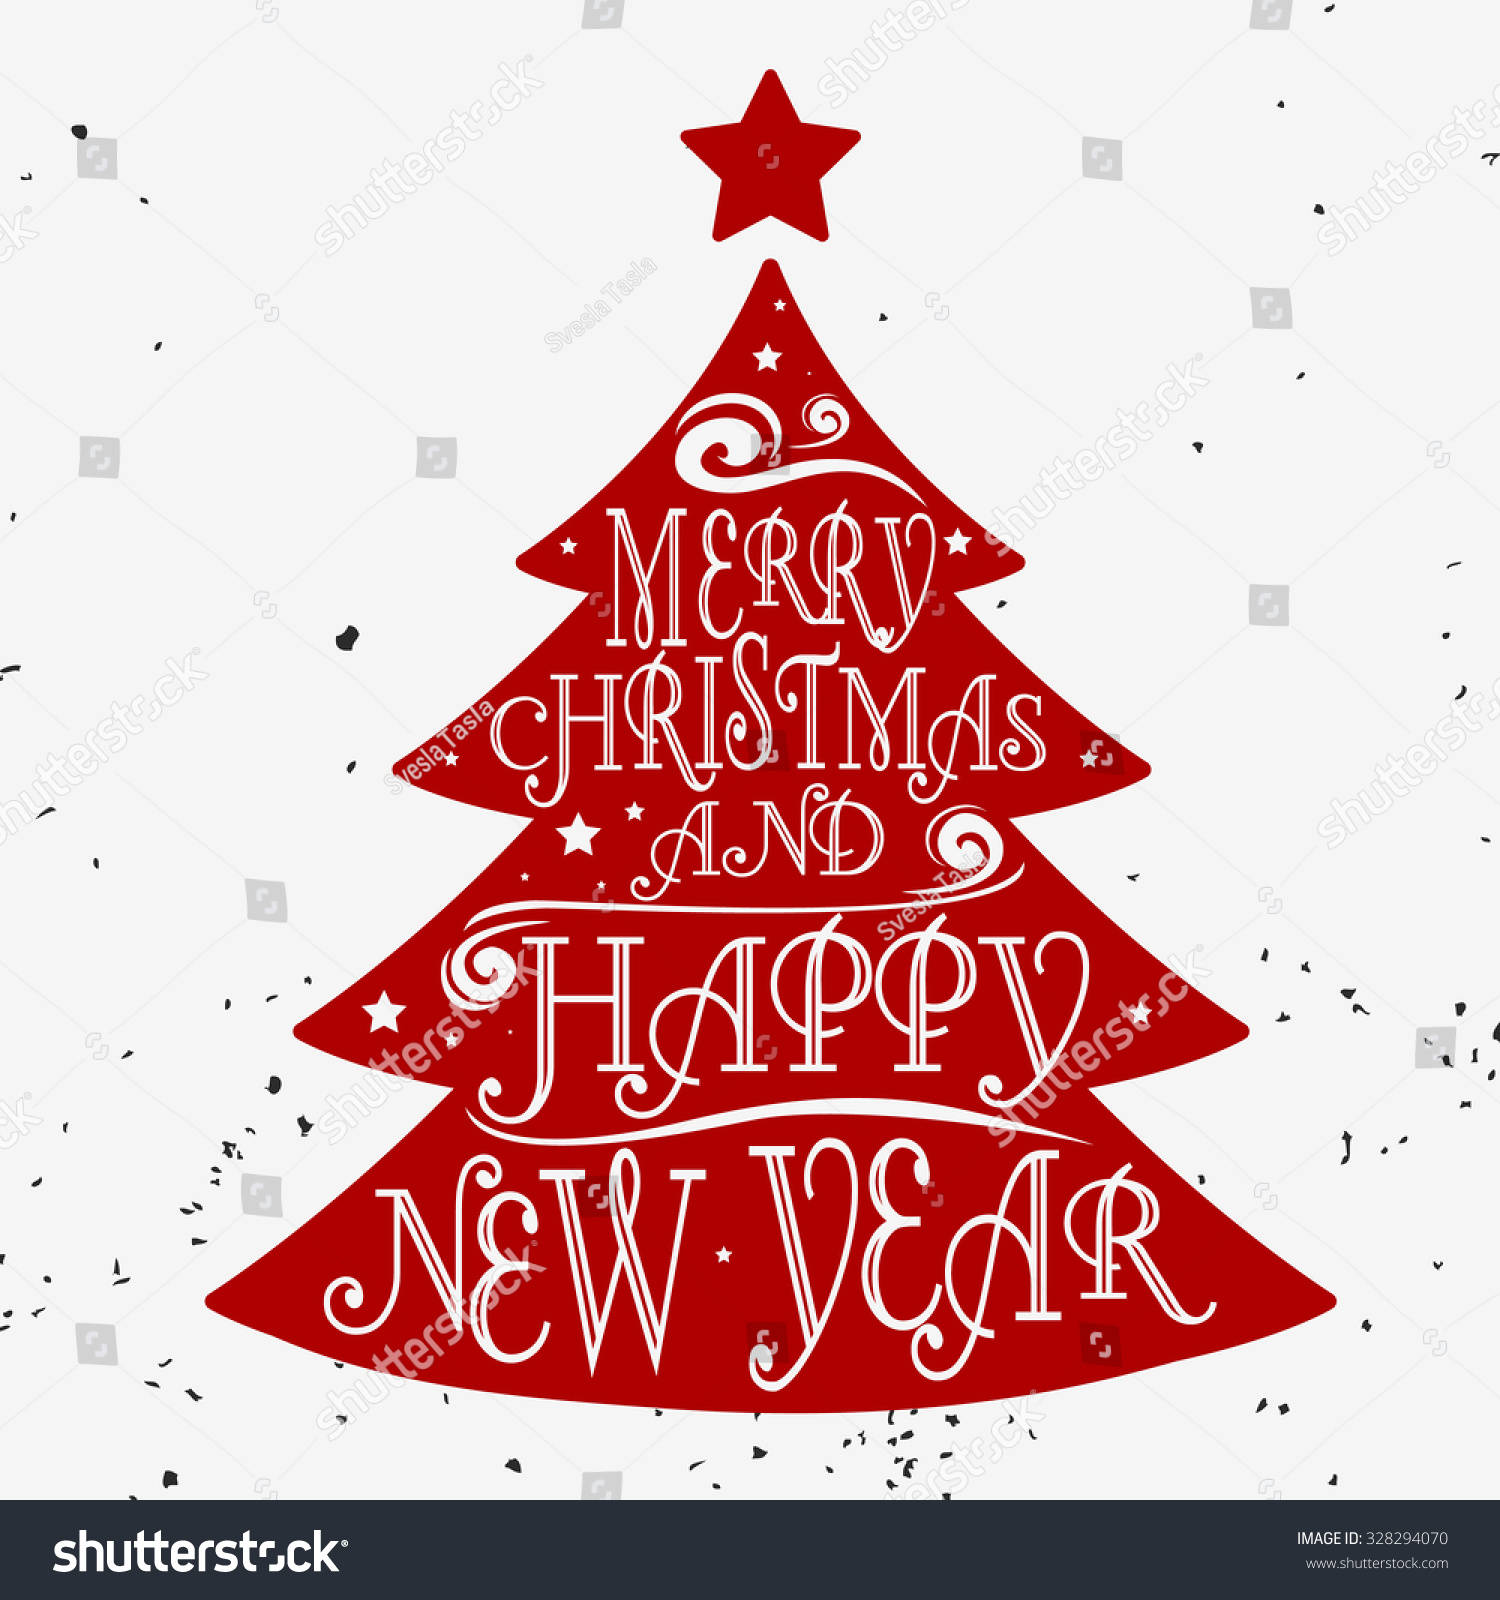 Typographical greeting card Christmas tree Merry christmas and happy new year Lettering